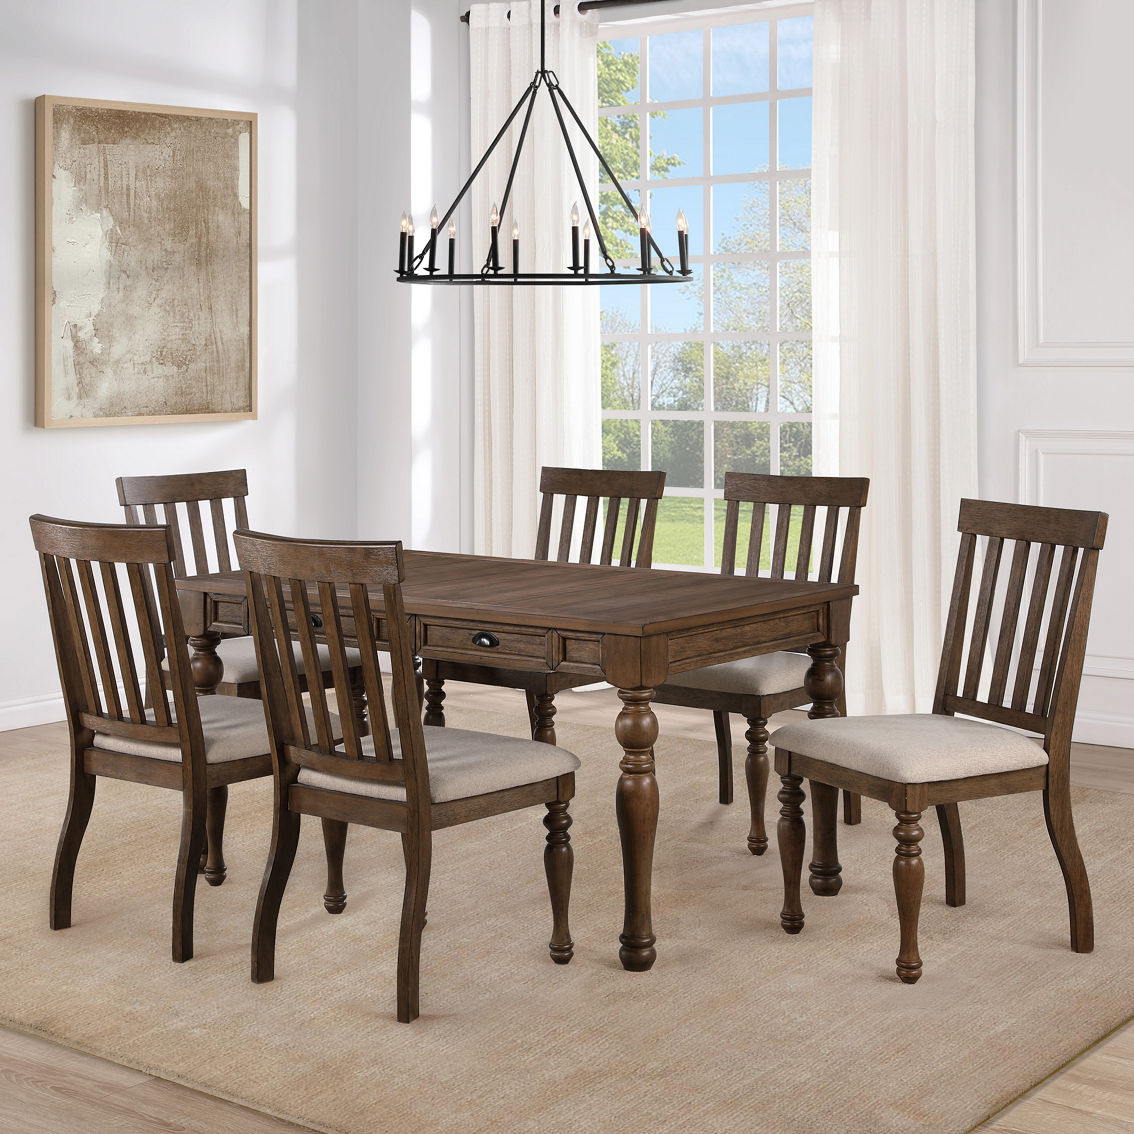 Steve Silver Joanna Brown Side chairs 2 pk. - Image 3 of 4